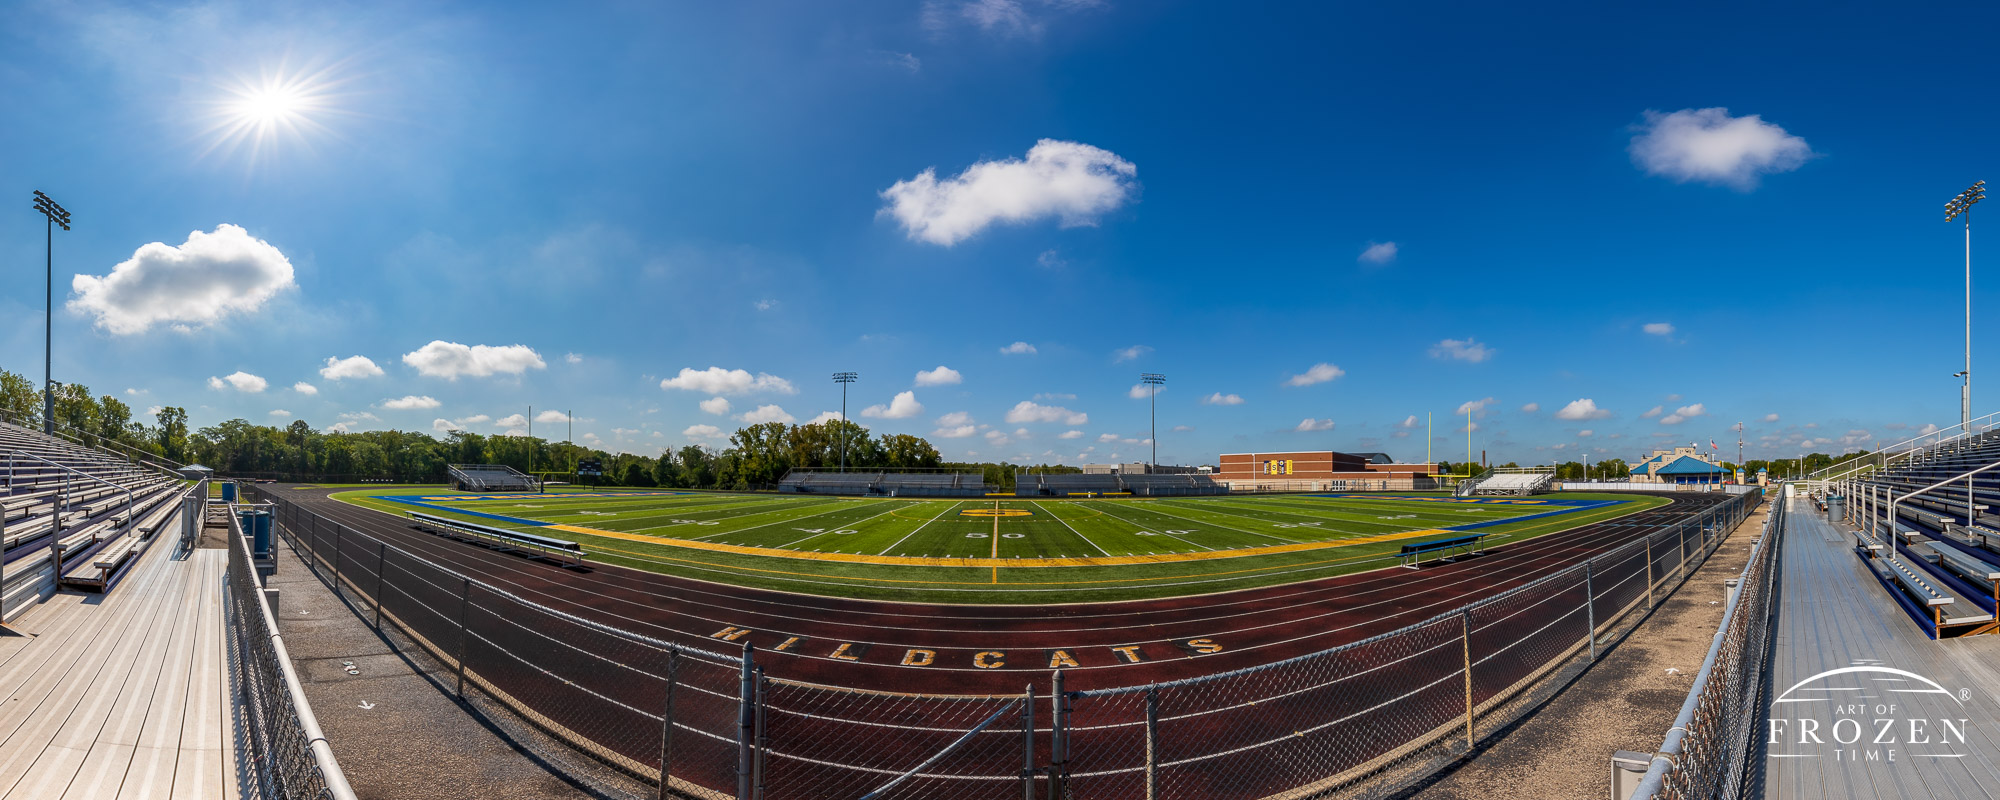 Wide-angle views of Springfield Wildcat Stadium on a sunny day featuring artificial turf and the school’s blue and yellow colors.